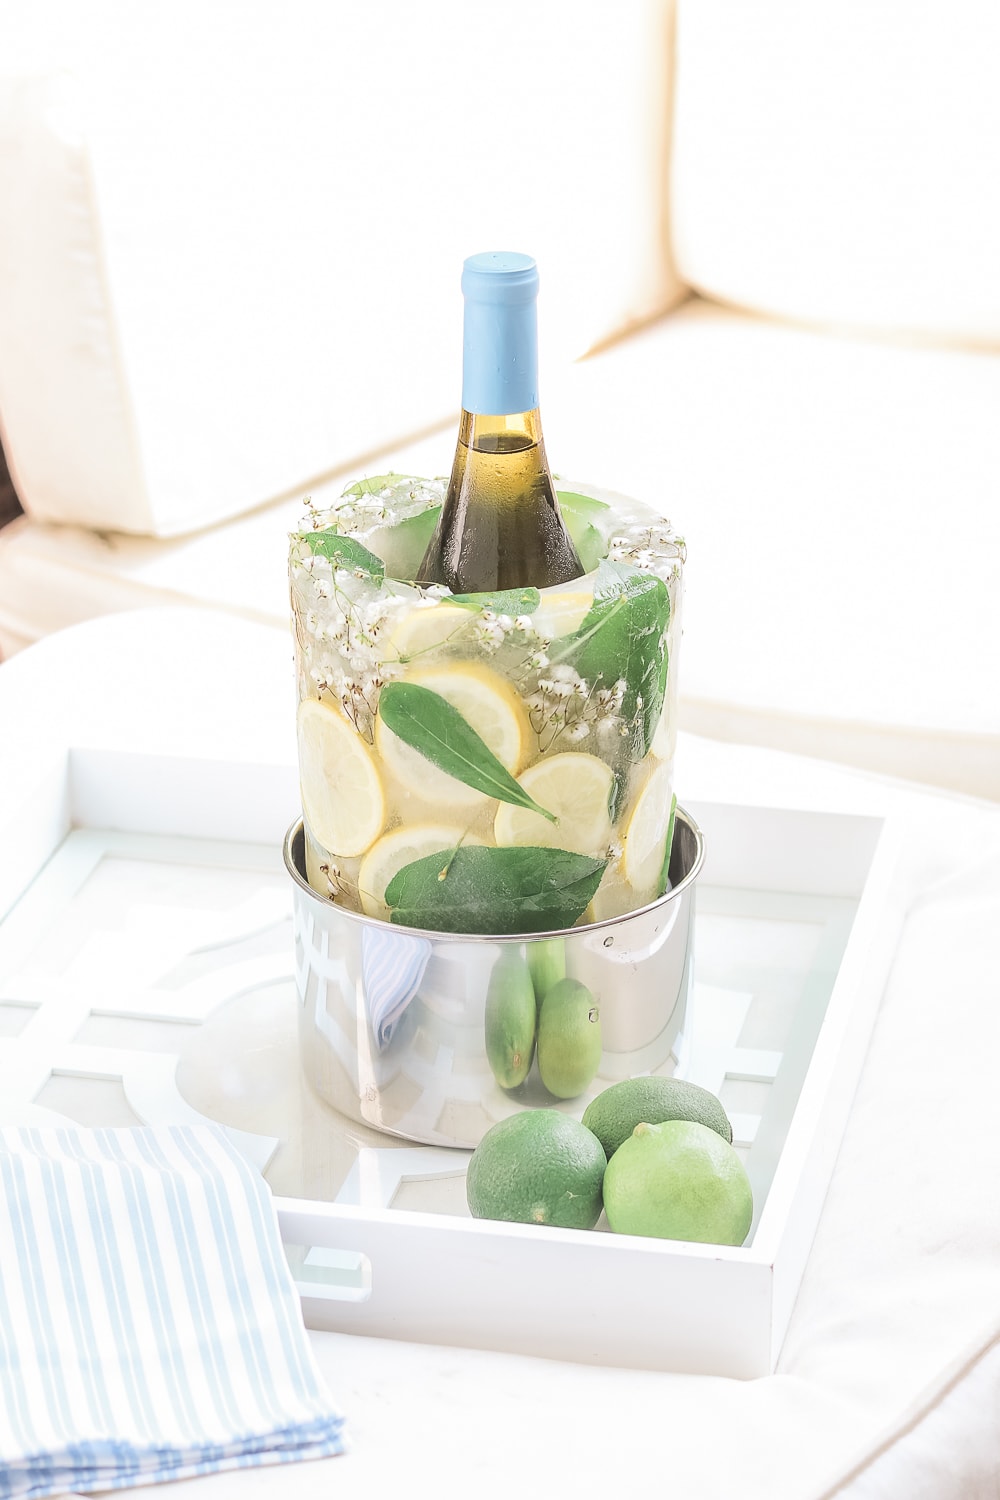 Entertaining blogger Stephanie Ziajka shows how to make your own ice bucket with the Laura Ashley Champagne Bucket Ice Mold on Diary of a Debutante